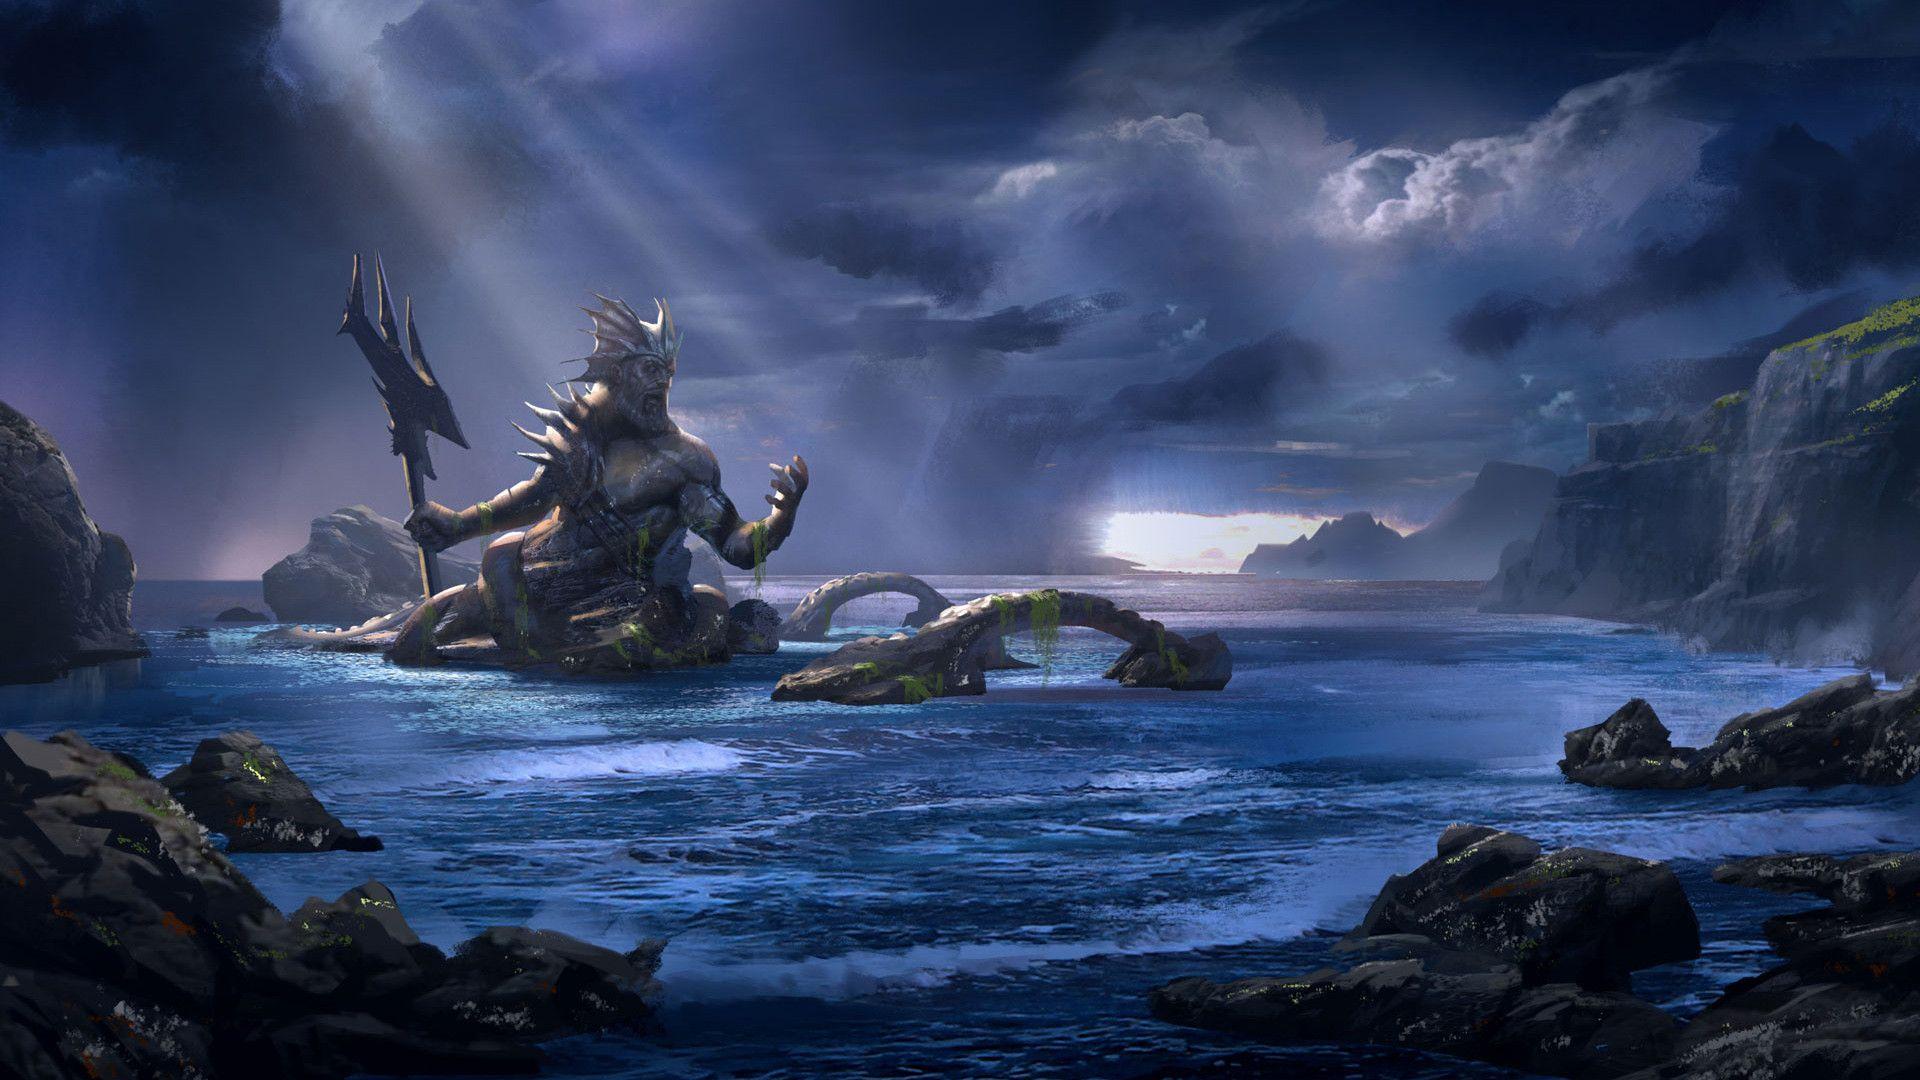  Anime Lord Shiva Angry Wallpaper HD Download  MyGodImages